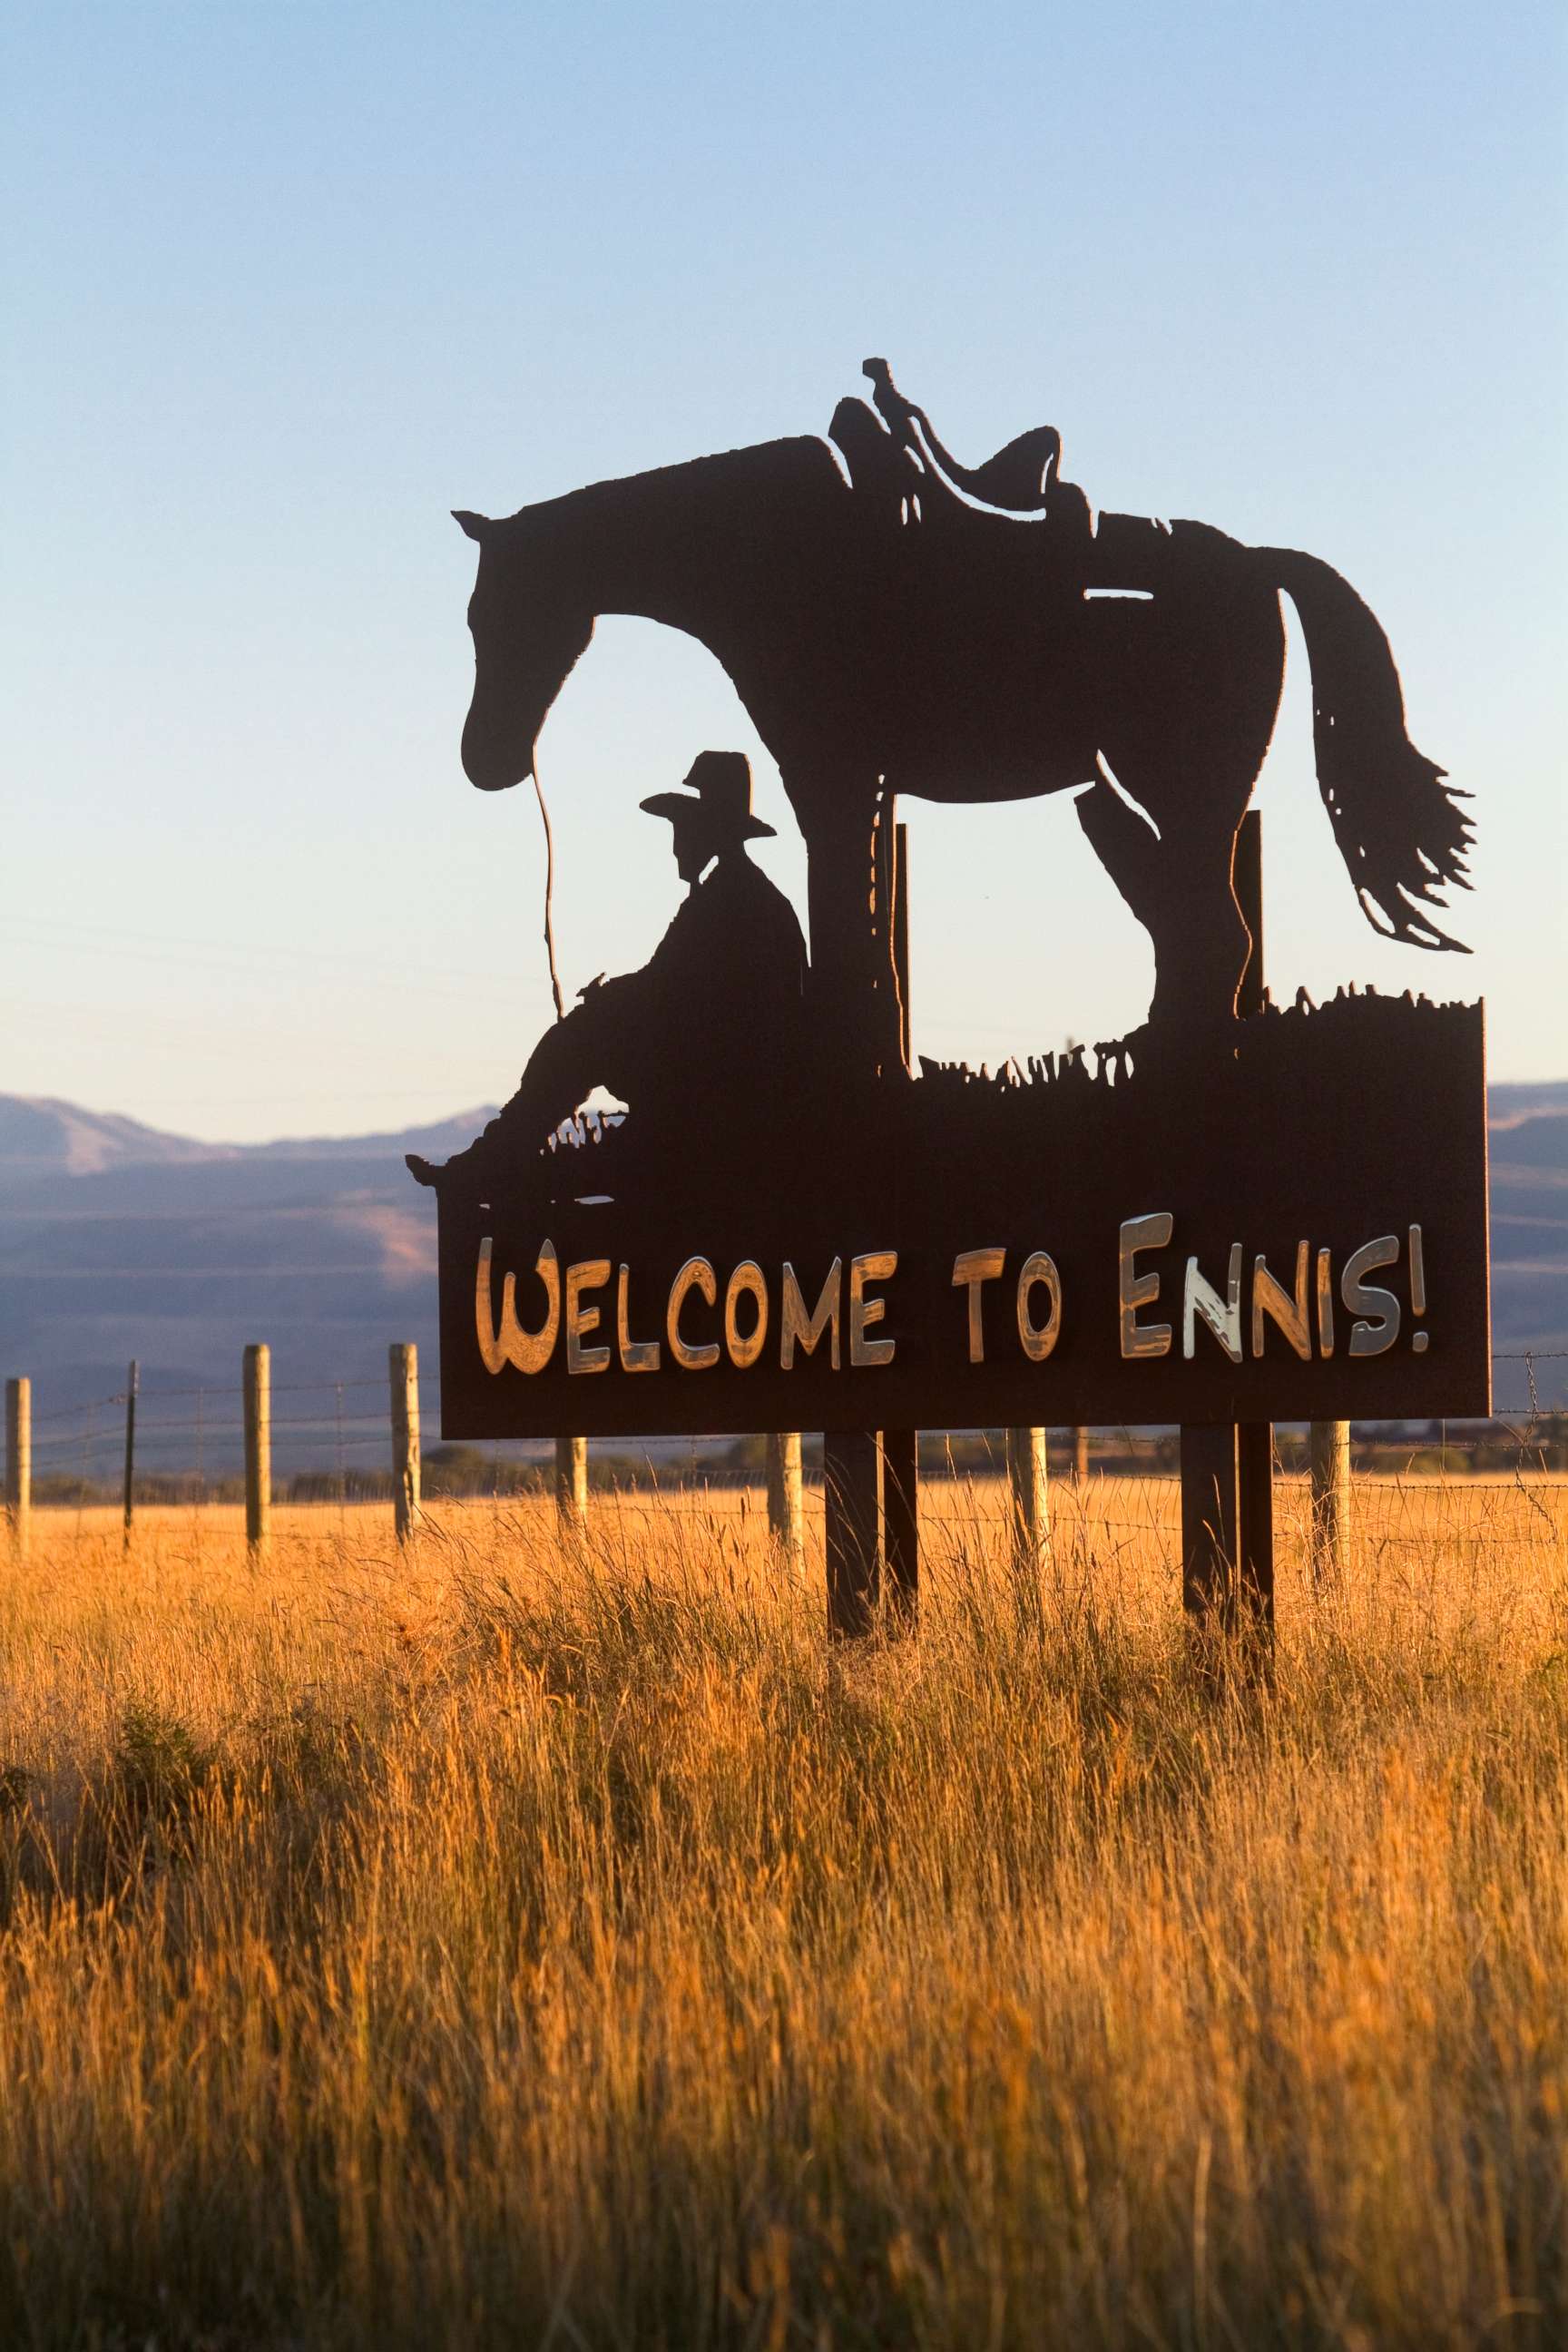 PHOTO: A welcome Sign to Ennis, Montana.